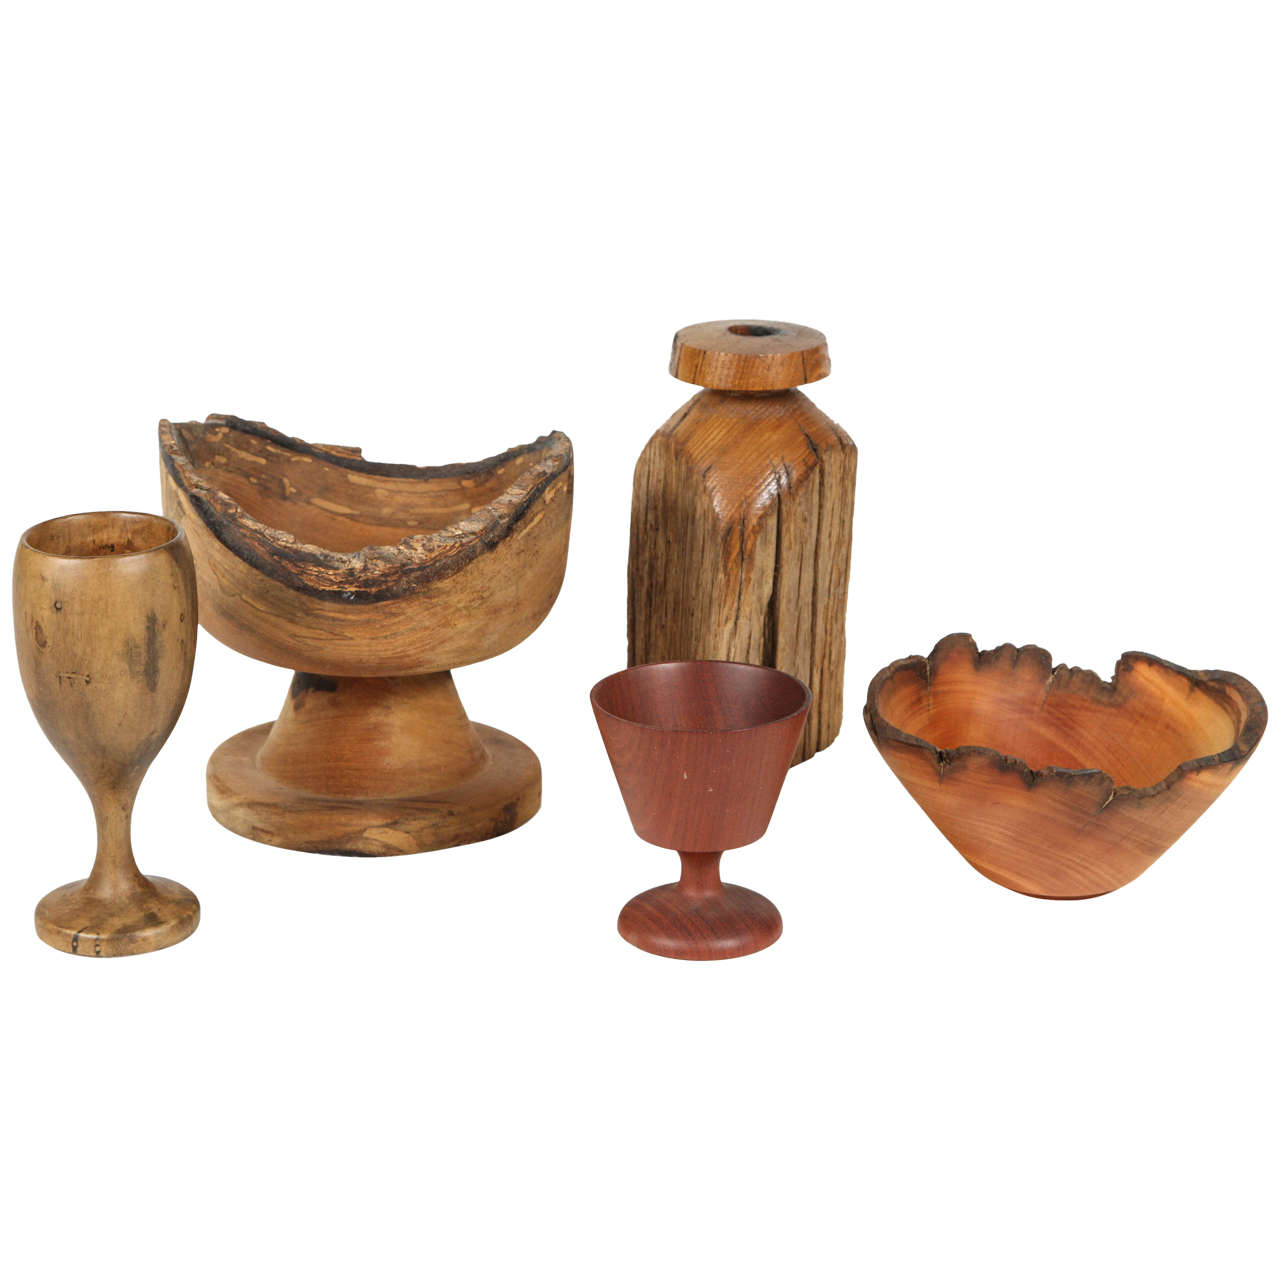 Collection of Carved Rustic Wood Vessels